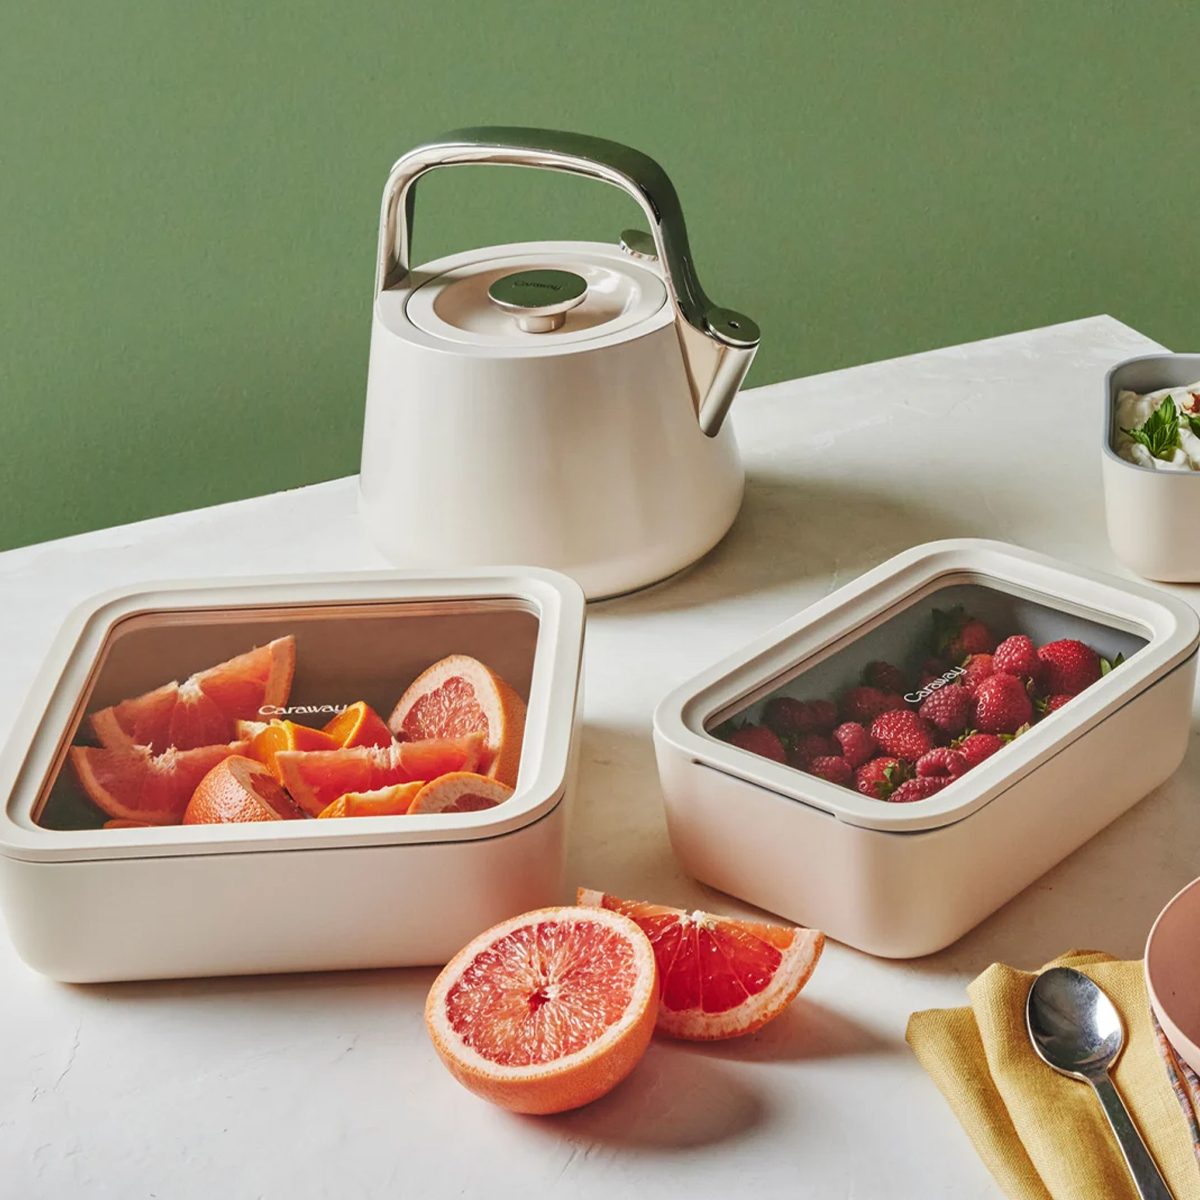 Caraway Food Storage Containers Aren't as Perfect as They Look (My